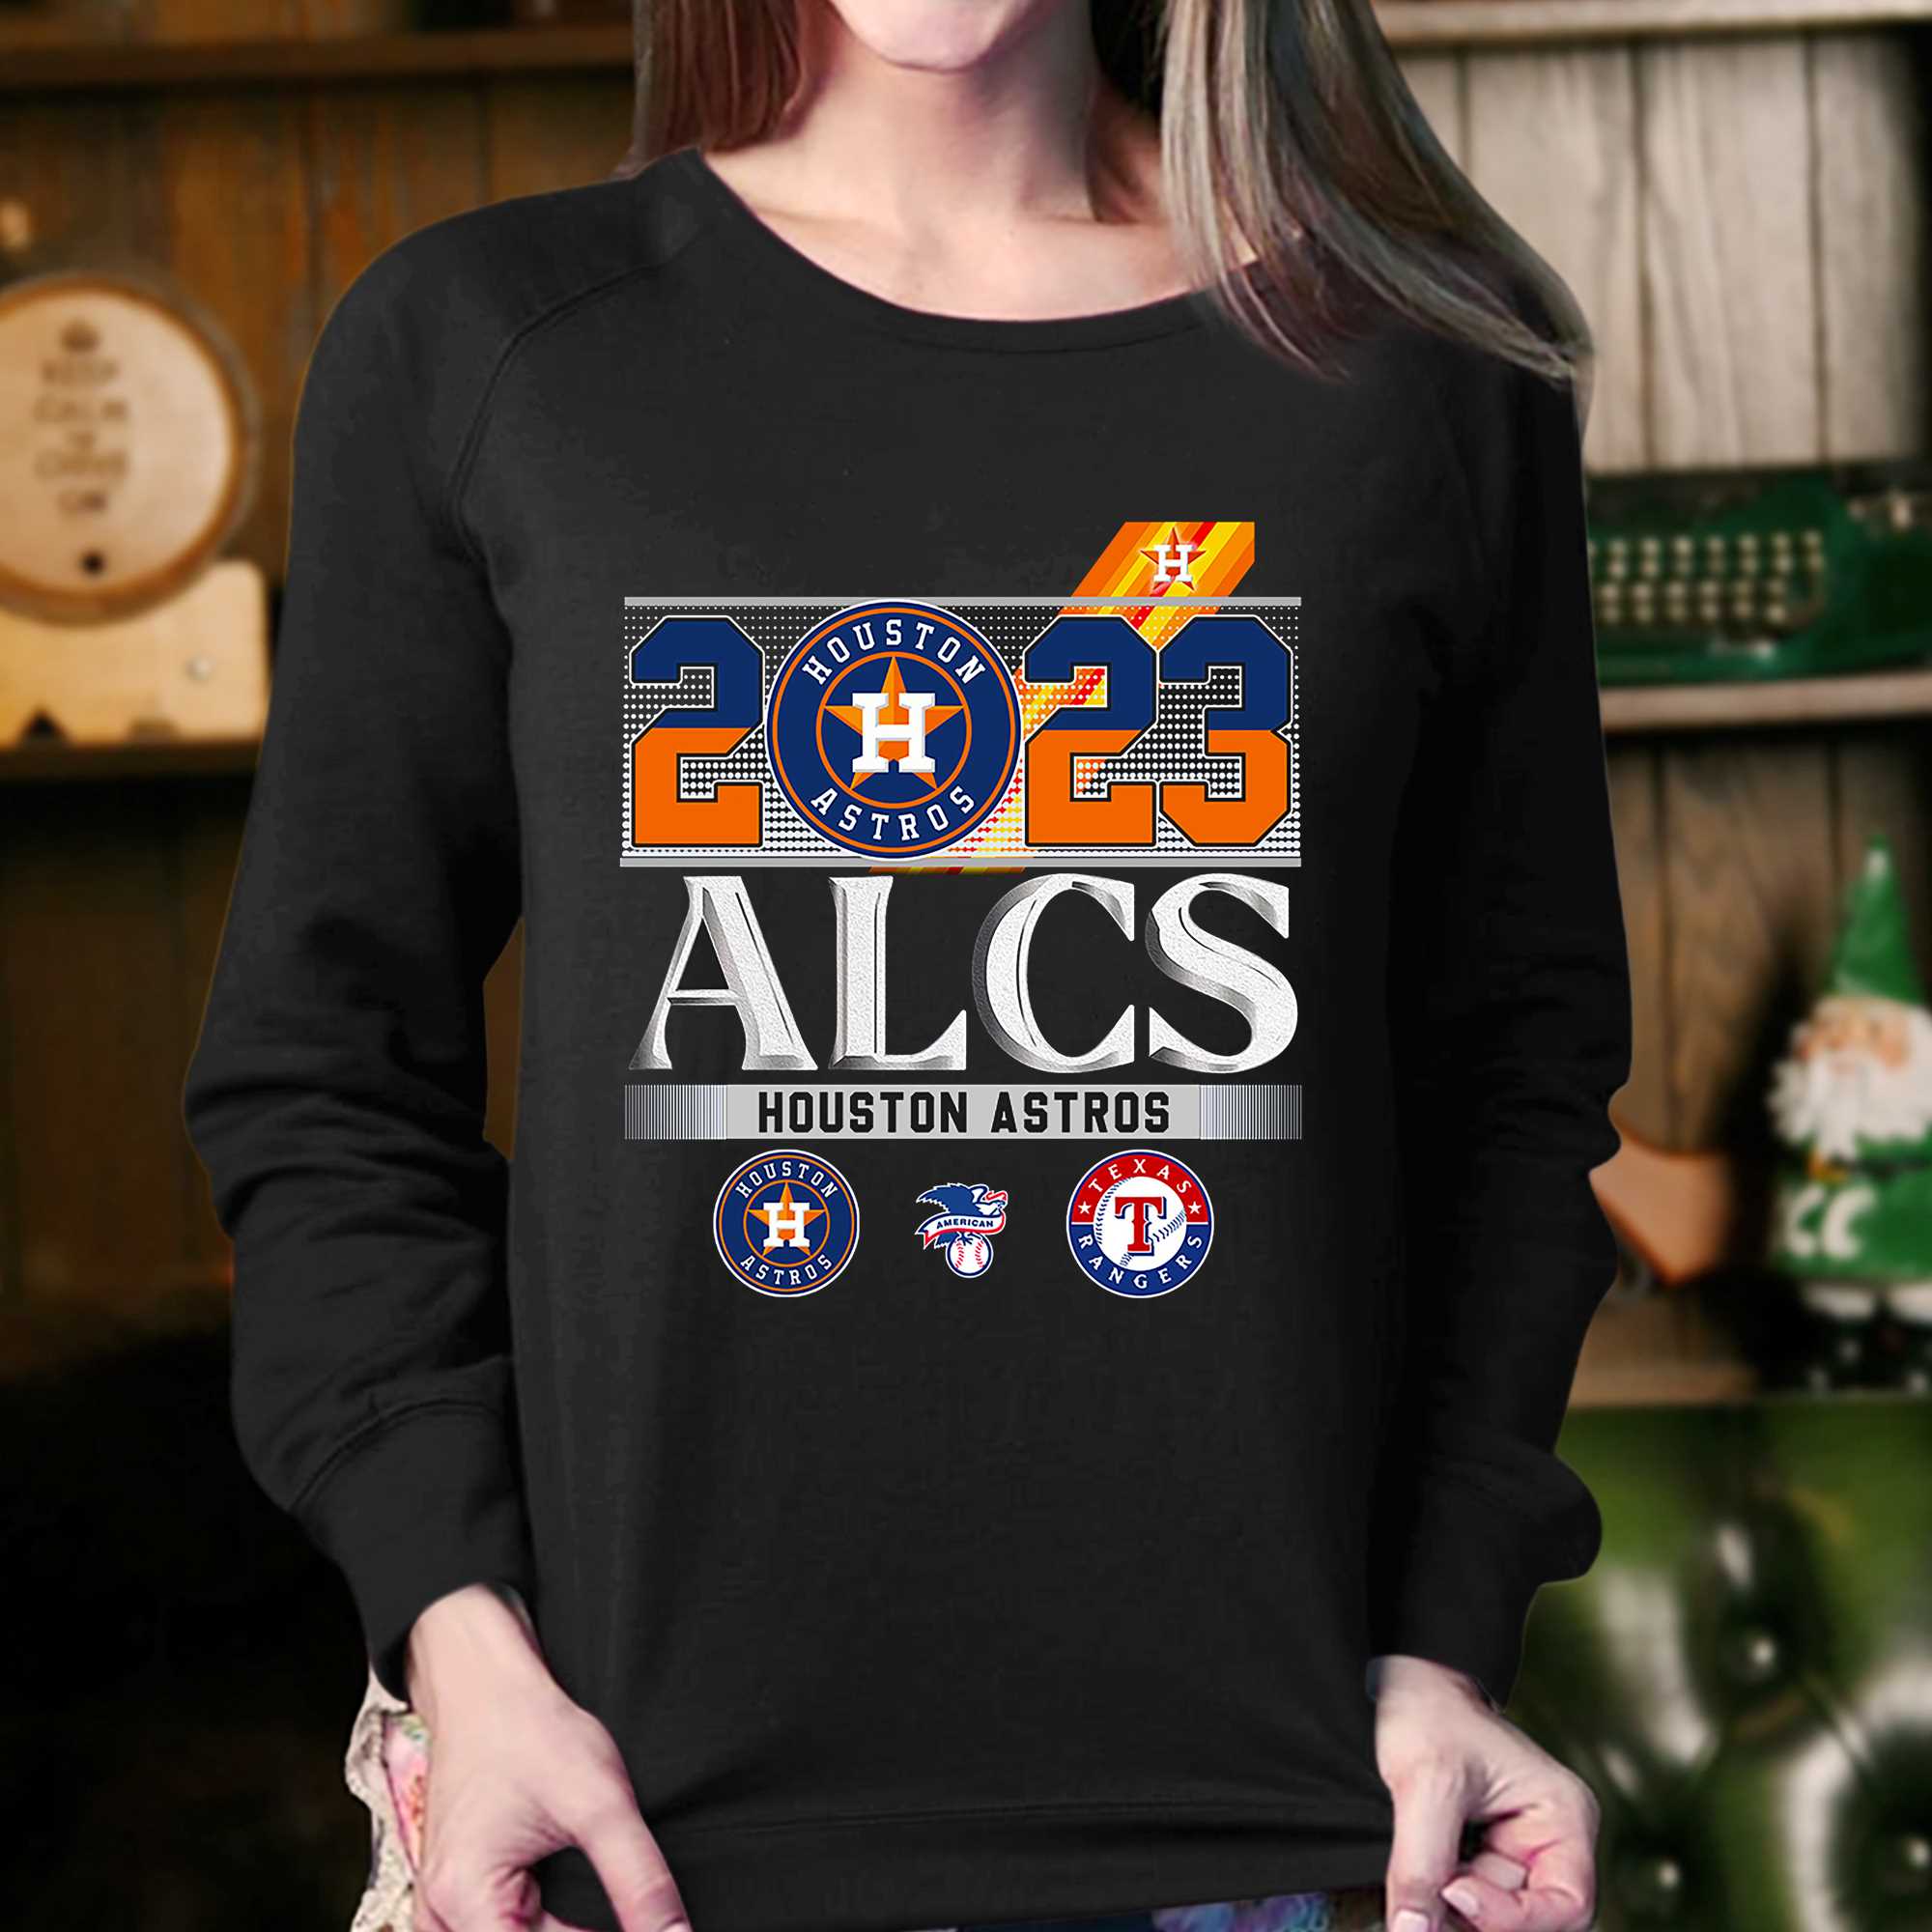 Houston Astros Women's Jerseys, Hoodies, T-shirts and more - Astros Store